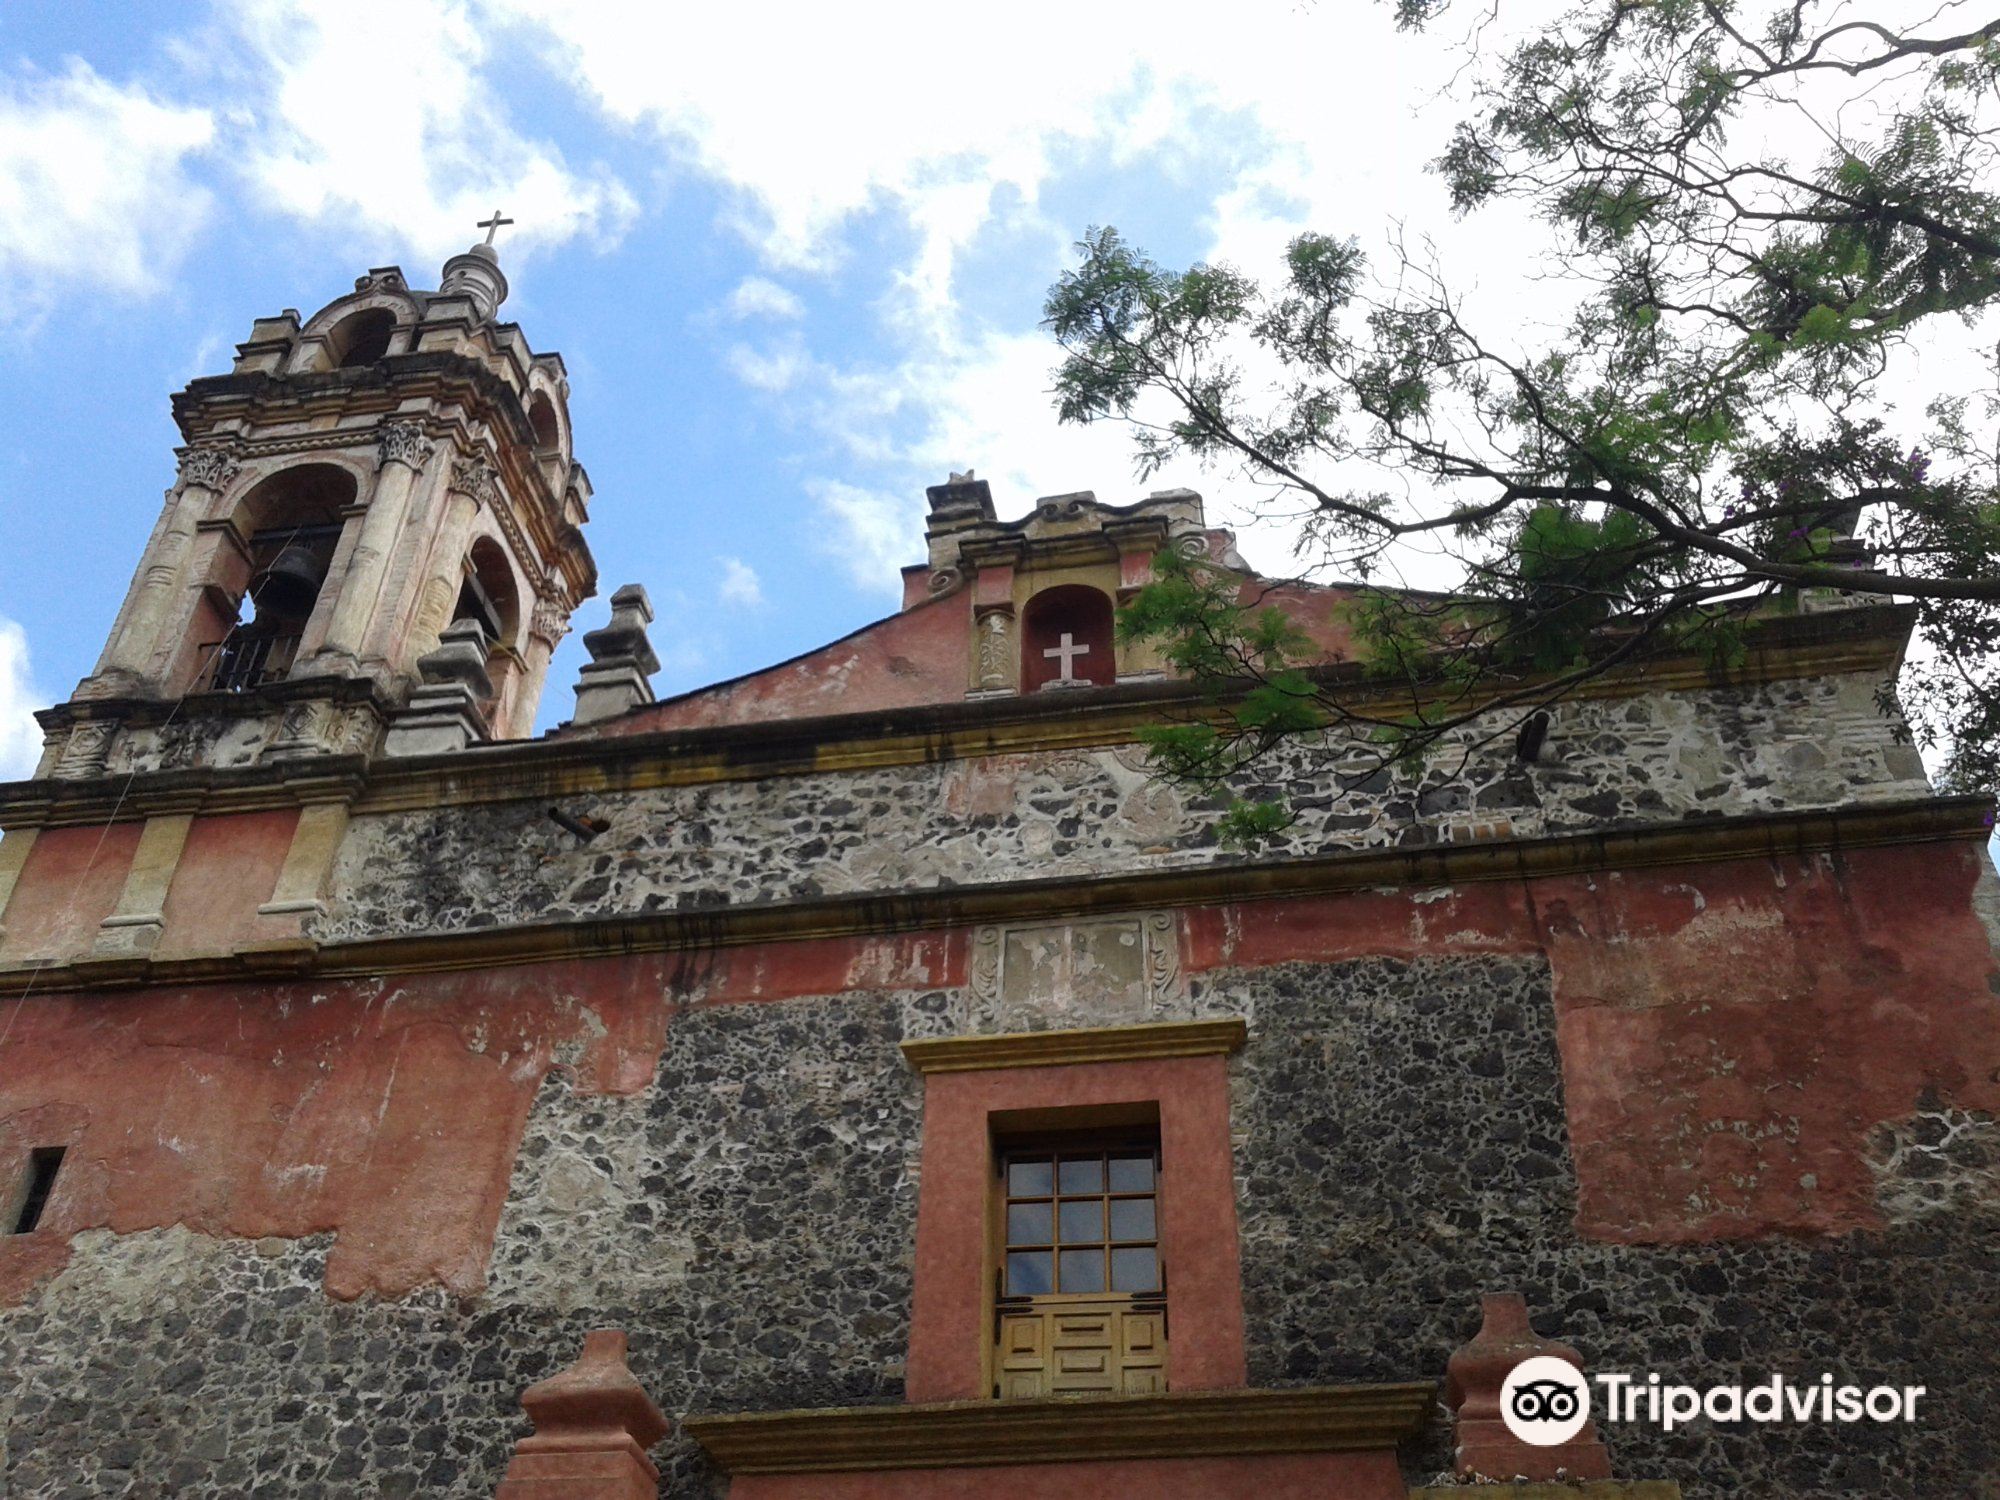 Iglesia de San Jacinto attraction reviews - Iglesia de San Jacinto tickets  - Iglesia de San Jacinto discounts - Iglesia de San Jacinto transportation,  address, opening hours - attractions, hotels, and food